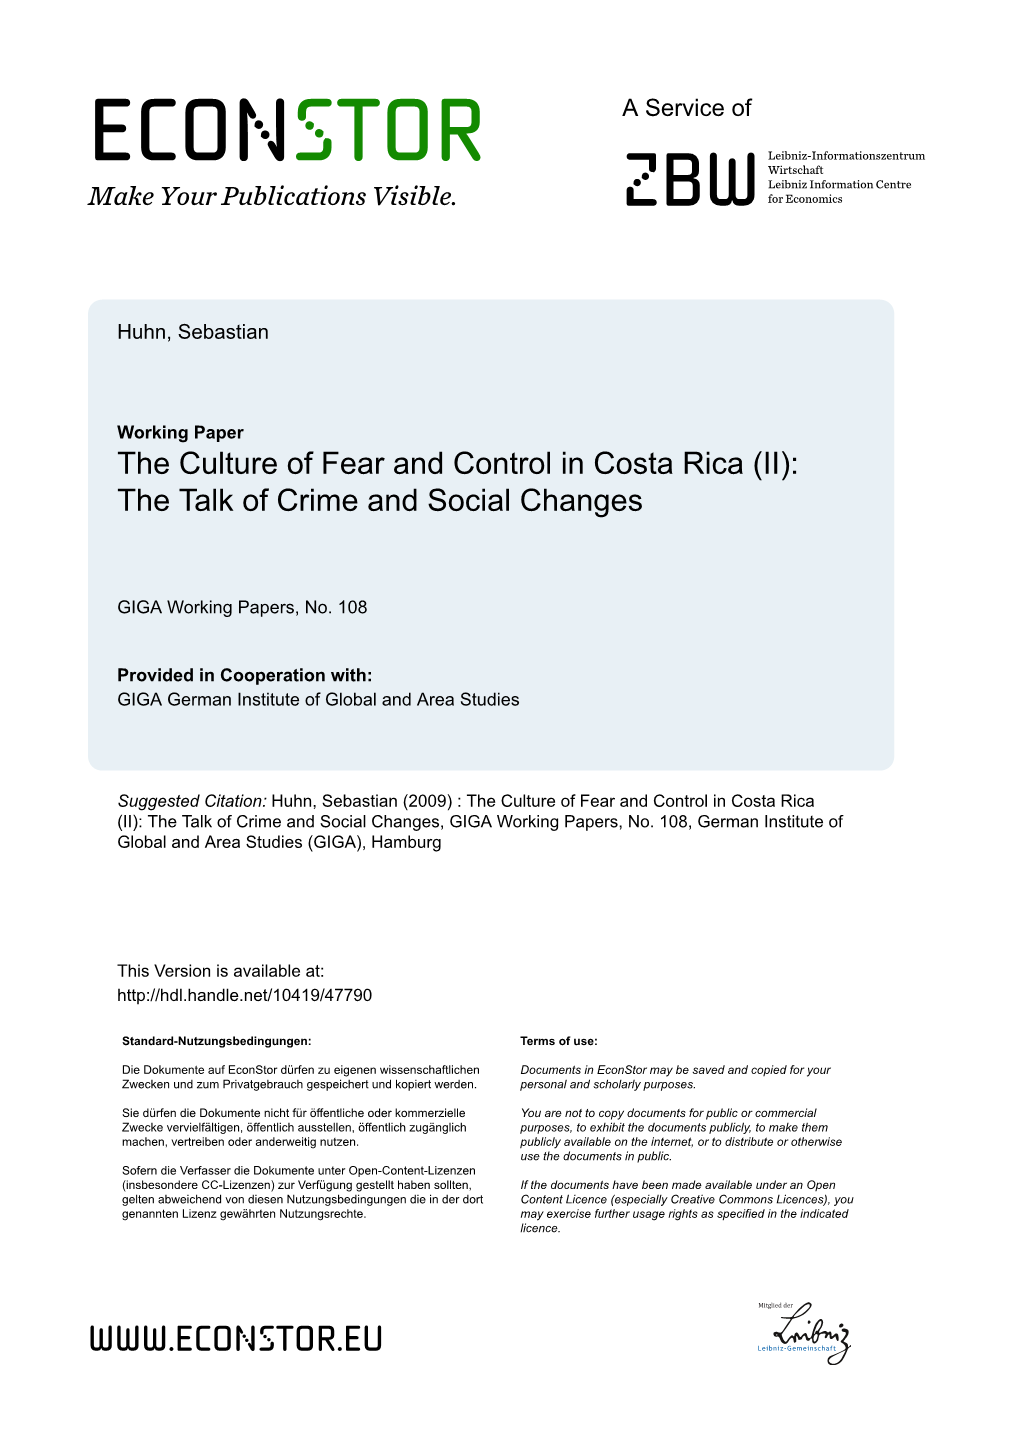 The Culture of Fear and Control in Costa Rica (II): the Talk of Crime and Social Changes